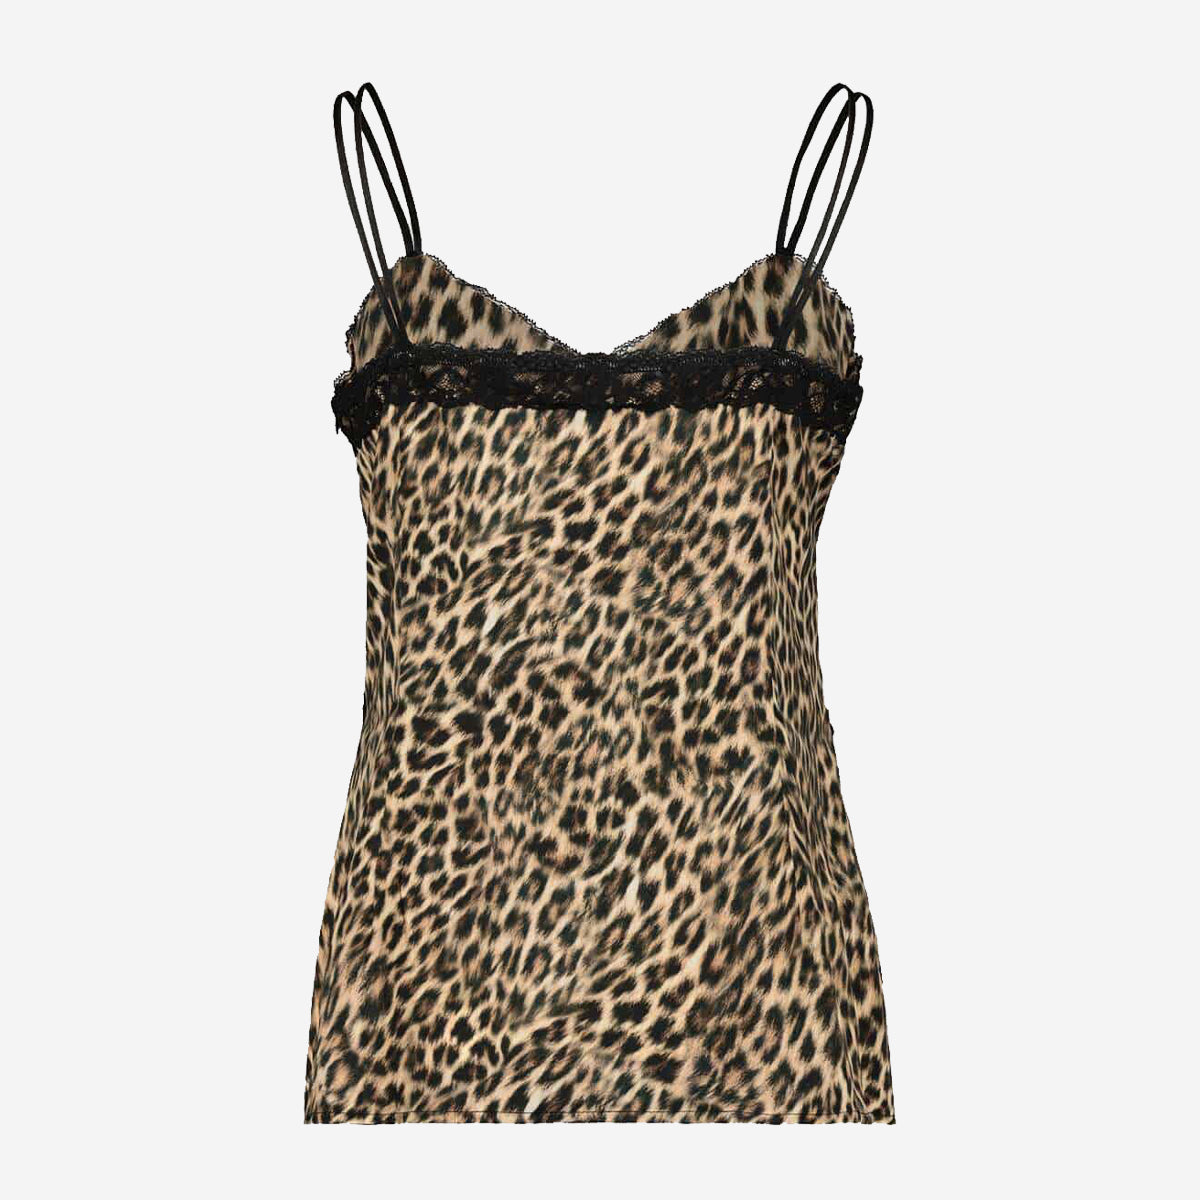 TOP IN LEOPARD DESIGN WITH LACE